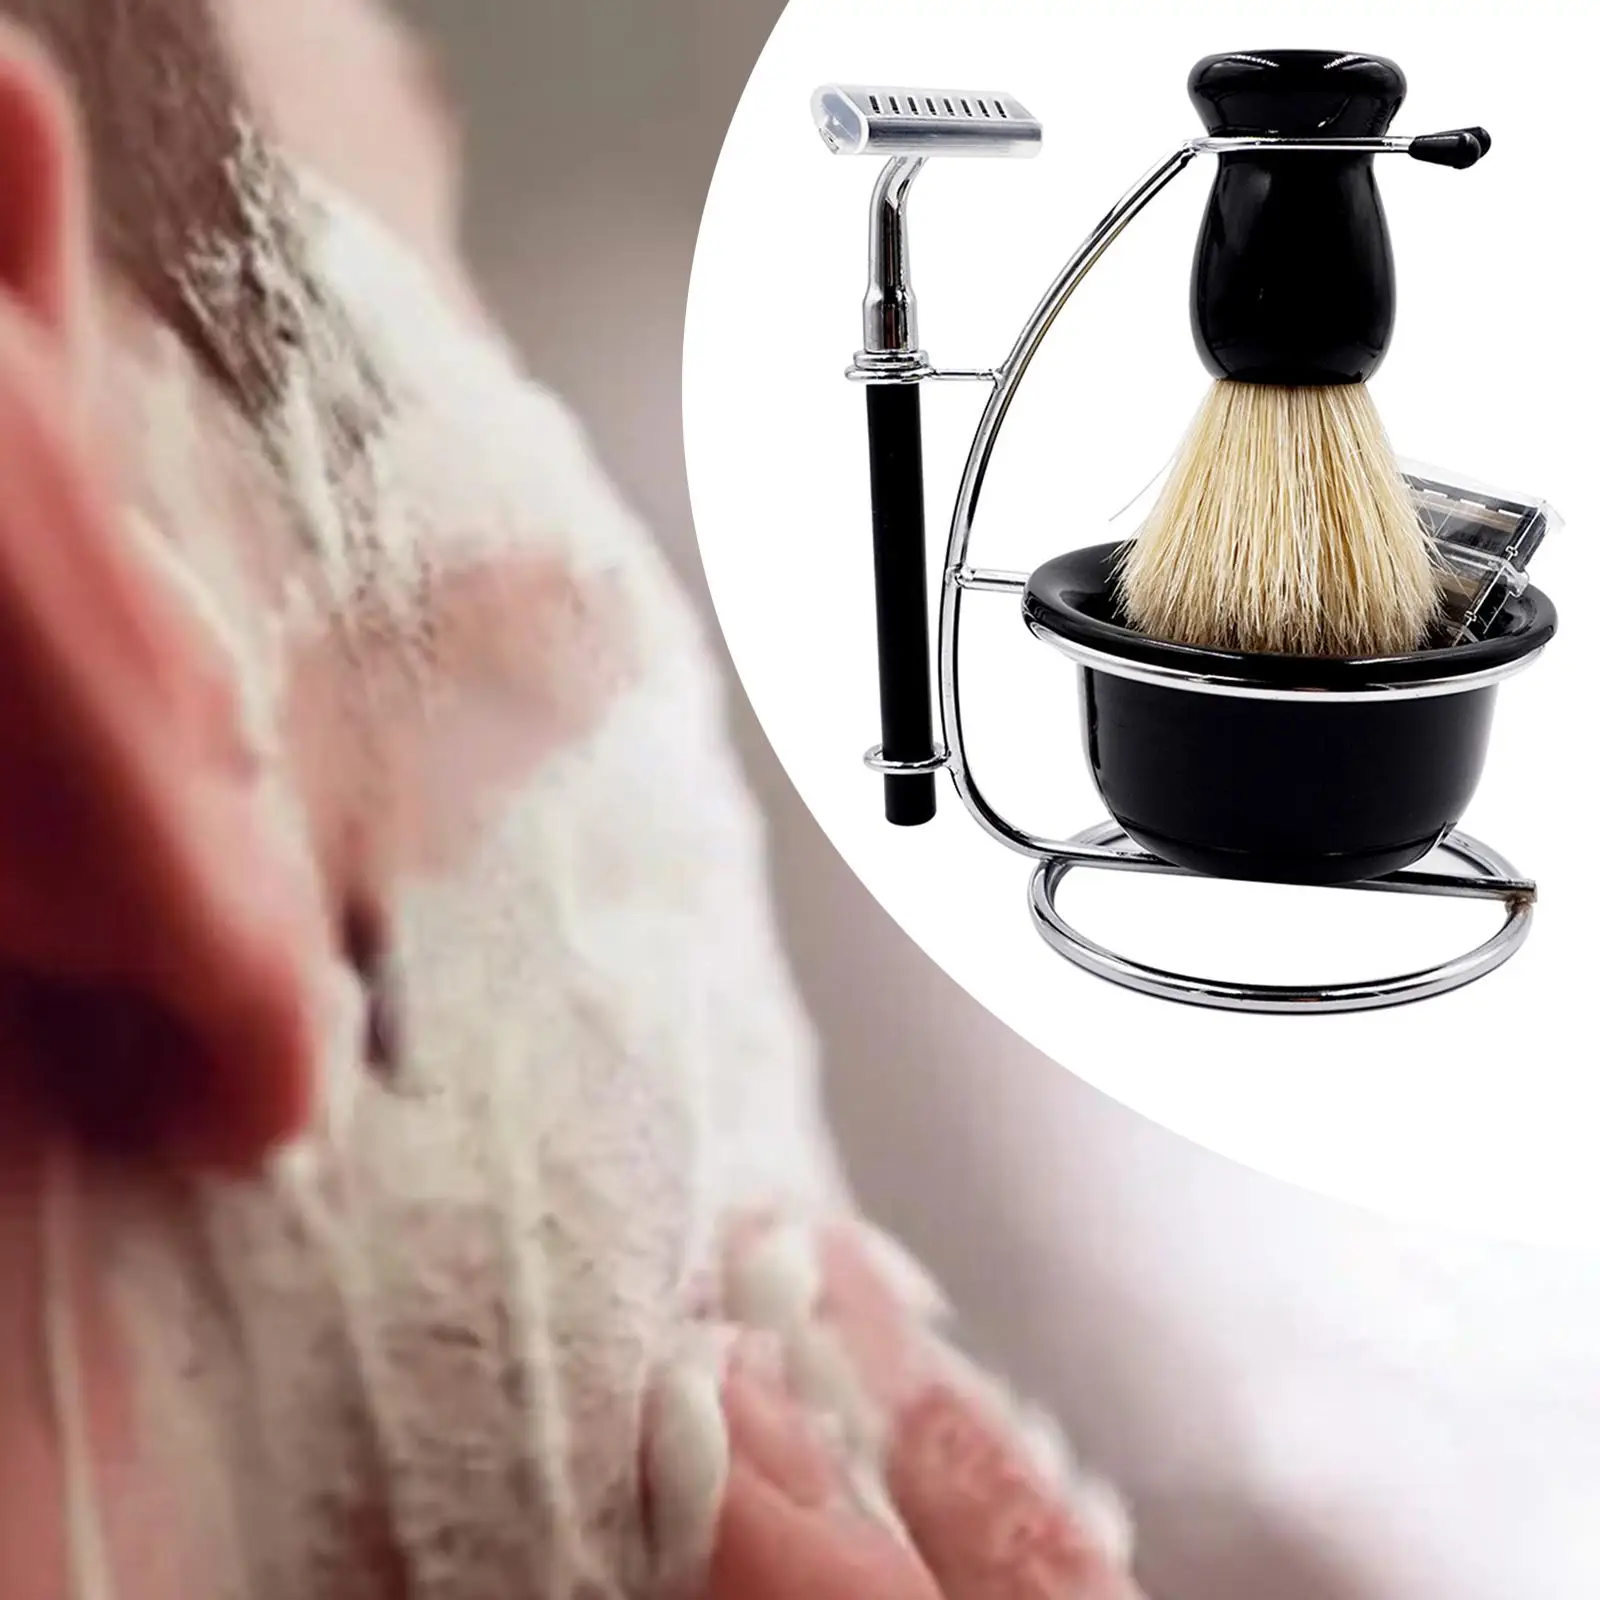 Men Shaving Set Manual Stand Brush Bowl Set Accessory Professional Sturdy Elegant Durable Weighted Bottom Solid Portable